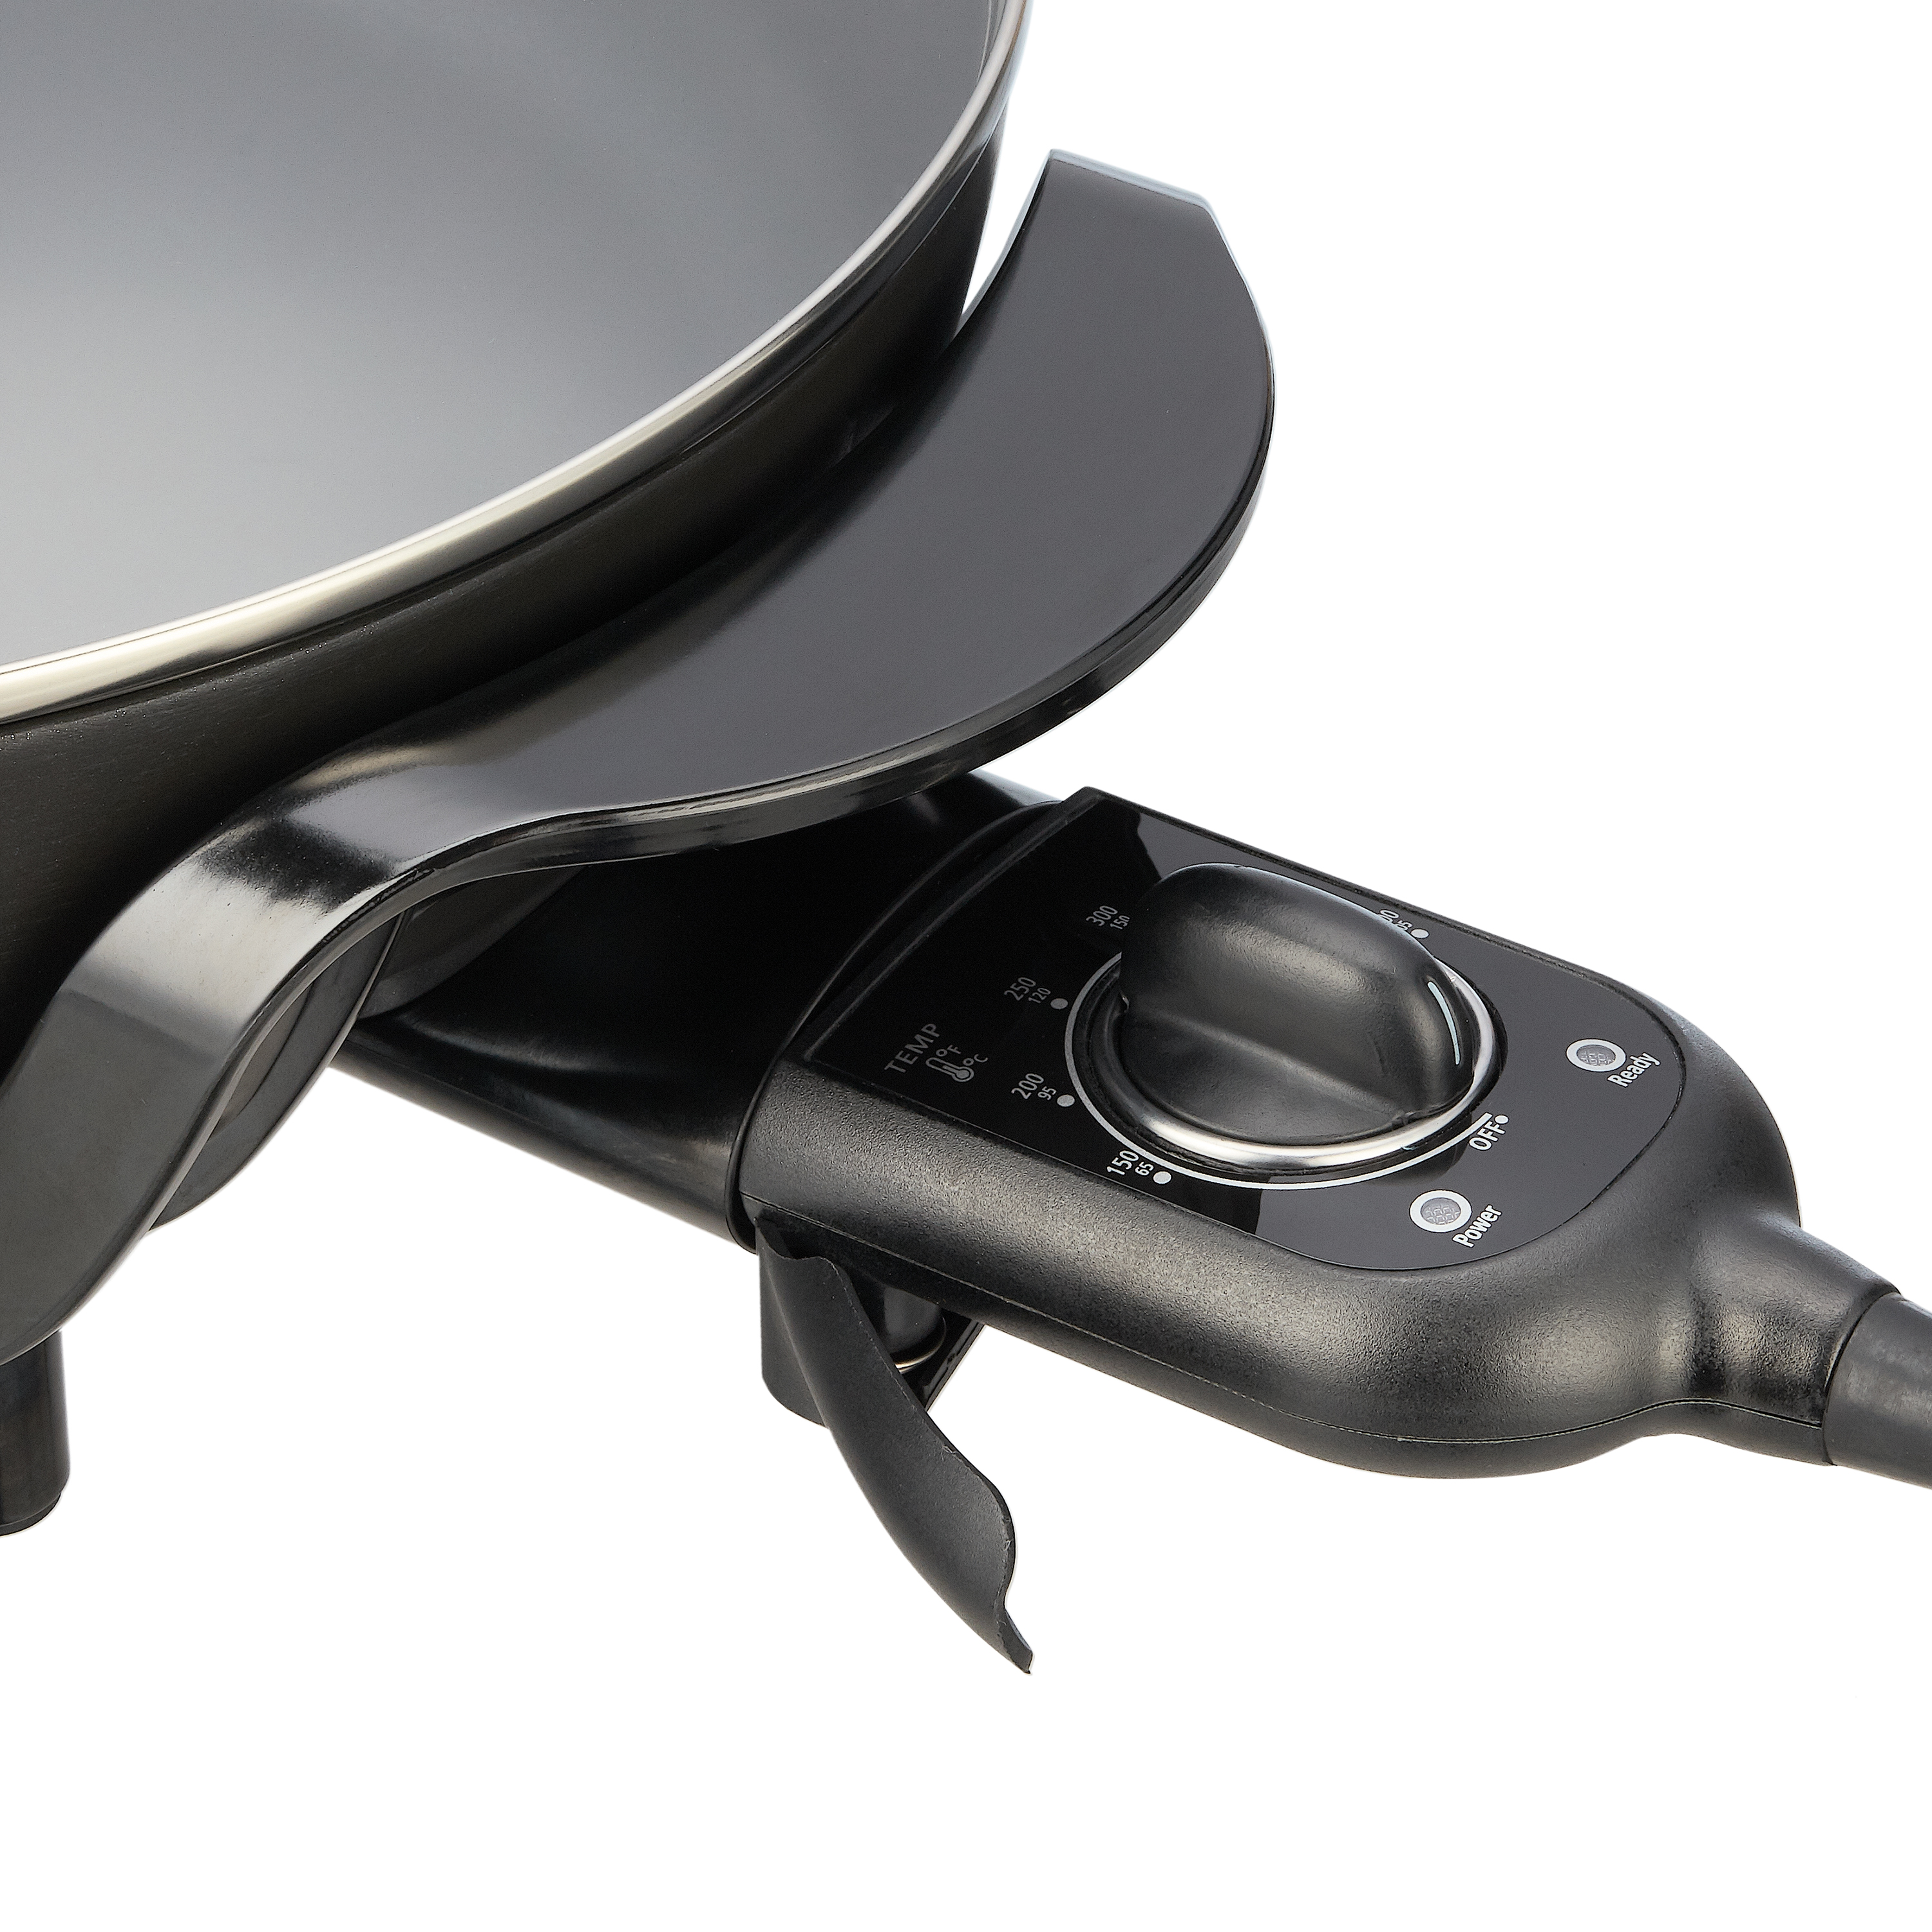 Mainstays 12" Round Nonstick Electric Skillet with Glass Cover, Black - image 5 of 6